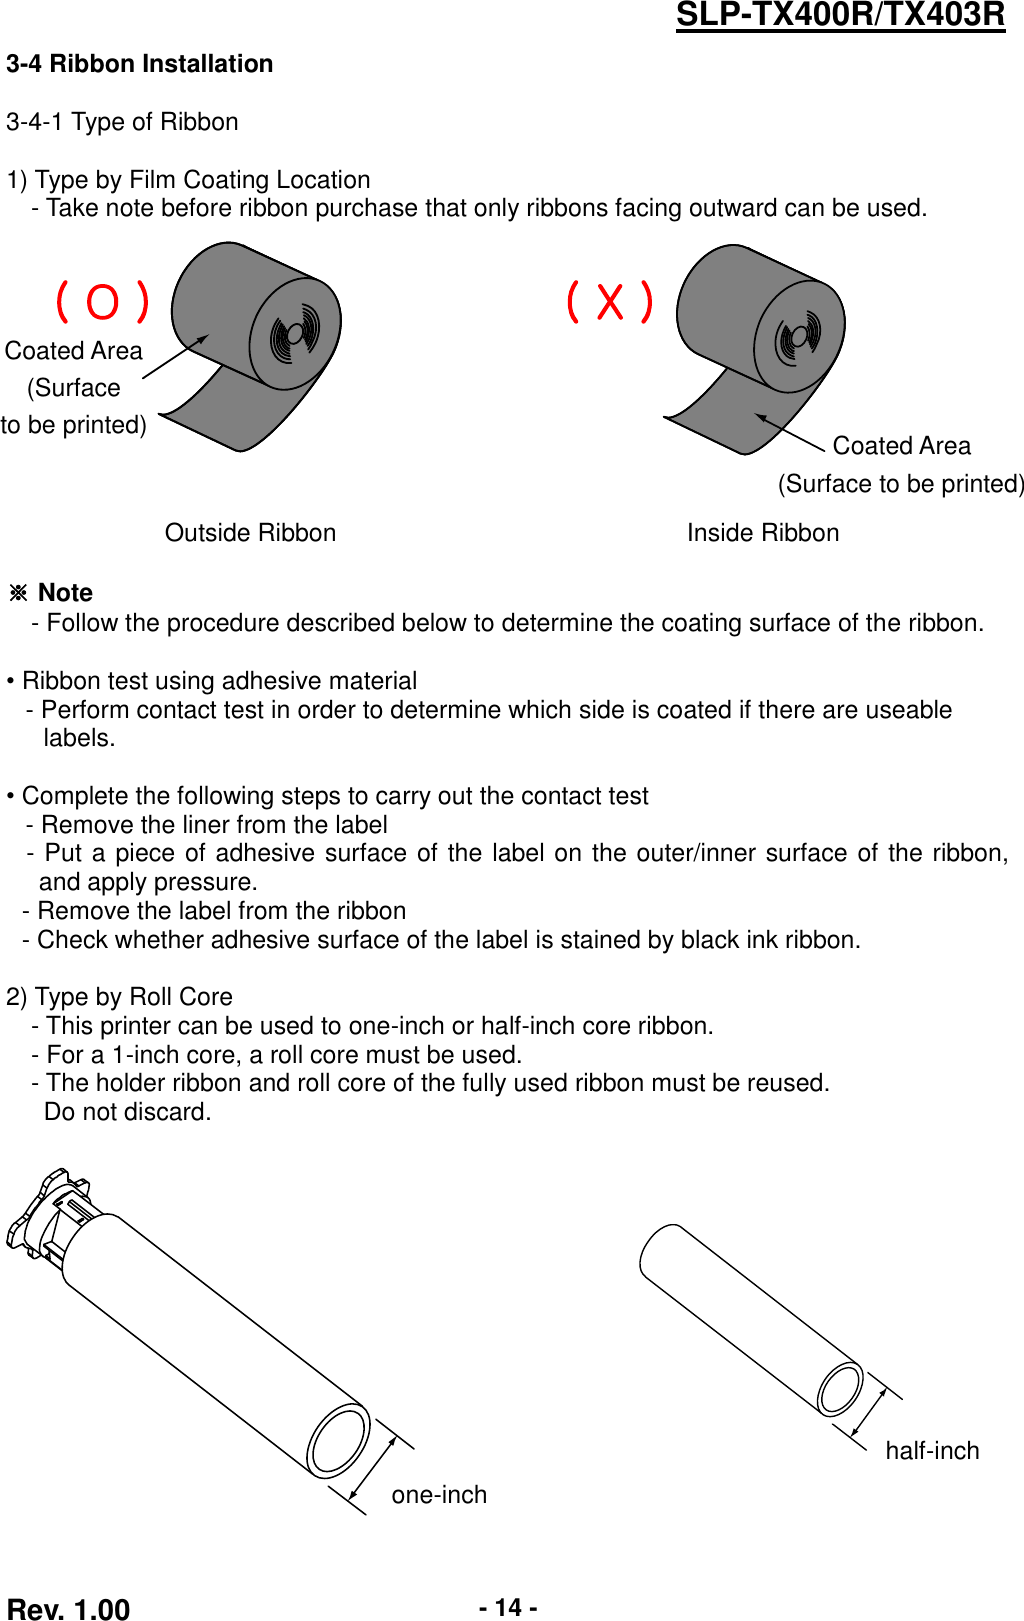  Rev. 1.00 - 14 - SLP-TX400R/TX403R 3-4 Ribbon Installation  3-4-1 Type of Ribbon  1) Type by Film Coating Location - Take note before ribbon purchase that only ribbons facing outward can be used.        Outside Ribbon Inside Ribbon  ※ Note   - Follow the procedure described below to determine the coating surface of the ribbon.    • Ribbon test using adhesive material      - Perform contact test in order to determine which side is coated if there are useable     labels.    • Complete the following steps to carry out the contact test      - Remove the liner from the label - Put a piece of adhesive surface of the label on the outer/inner surface of the ribbon, and apply pressure.   - Remove the label from the ribbon - Check whether adhesive surface of the label is stained by black ink ribbon.  2) Type by Roll Core - This printer can be used to one-inch or half-inch core ribbon. - For a 1-inch core, a roll core must be used. - The holder ribbon and roll core of the fully used ribbon must be reused.     Do not discard.           one-inch half-inch Coated Area (Surface   to be printed) Coated Area (Surface to be printed)  ( O ) ( X ) 